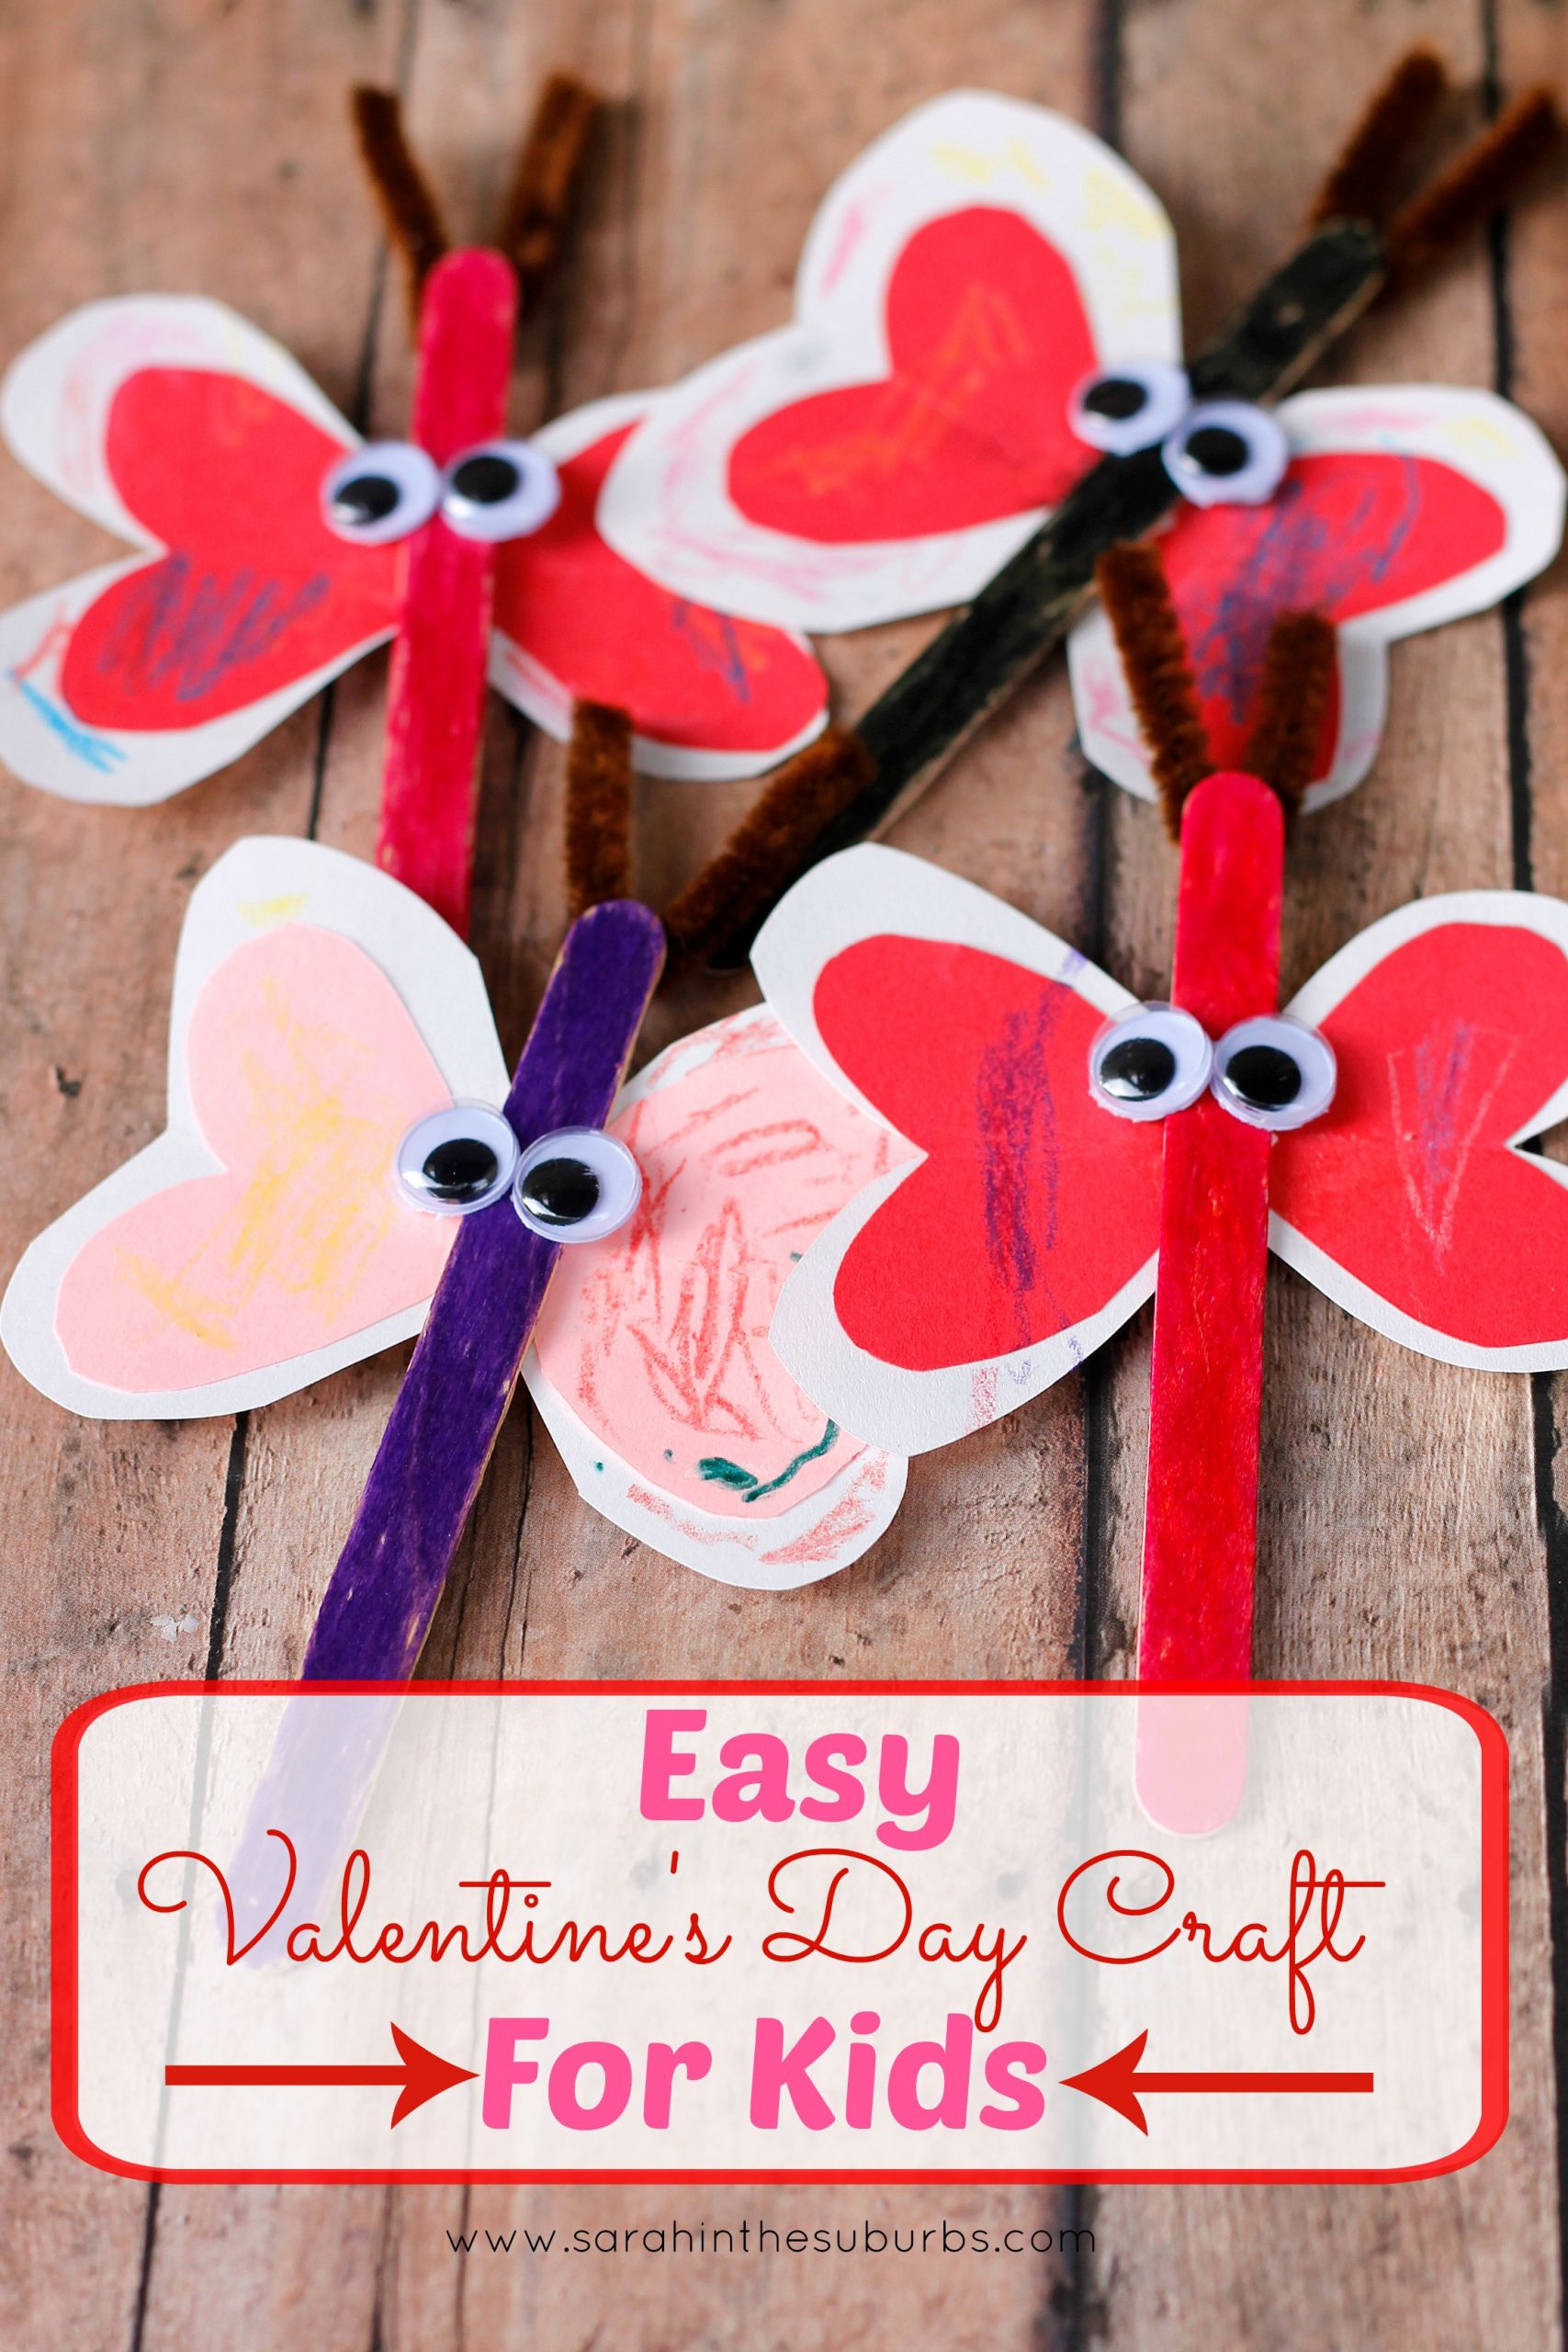 Easy Toddler Crafts
 Easy Valentine s Day Craft for Kids Sarah in the Suburbs